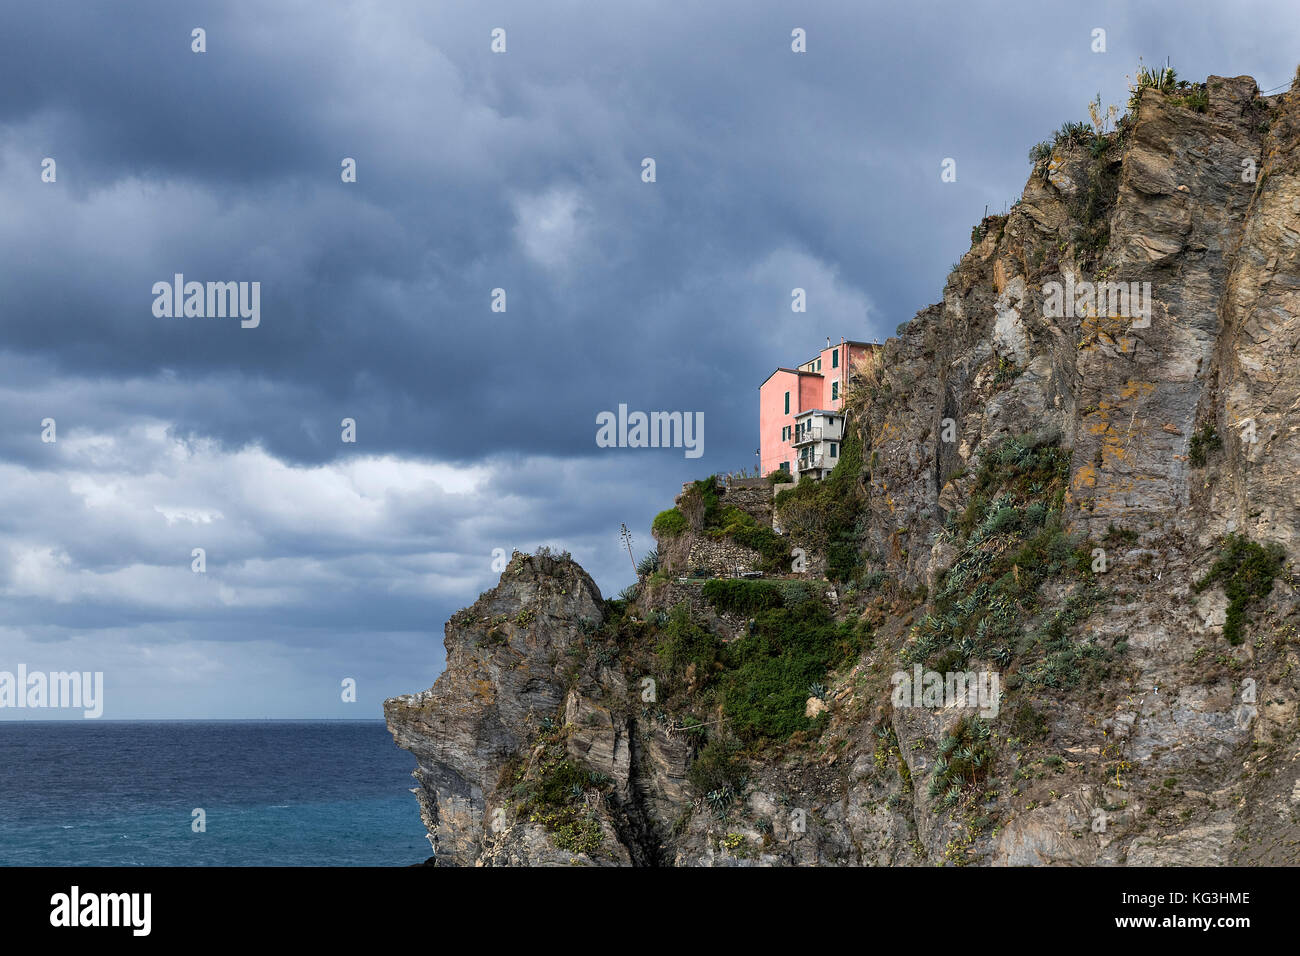 Remote house perched on seaside cliff, Cinque Terre, Liguria, Italy. Stock Photo